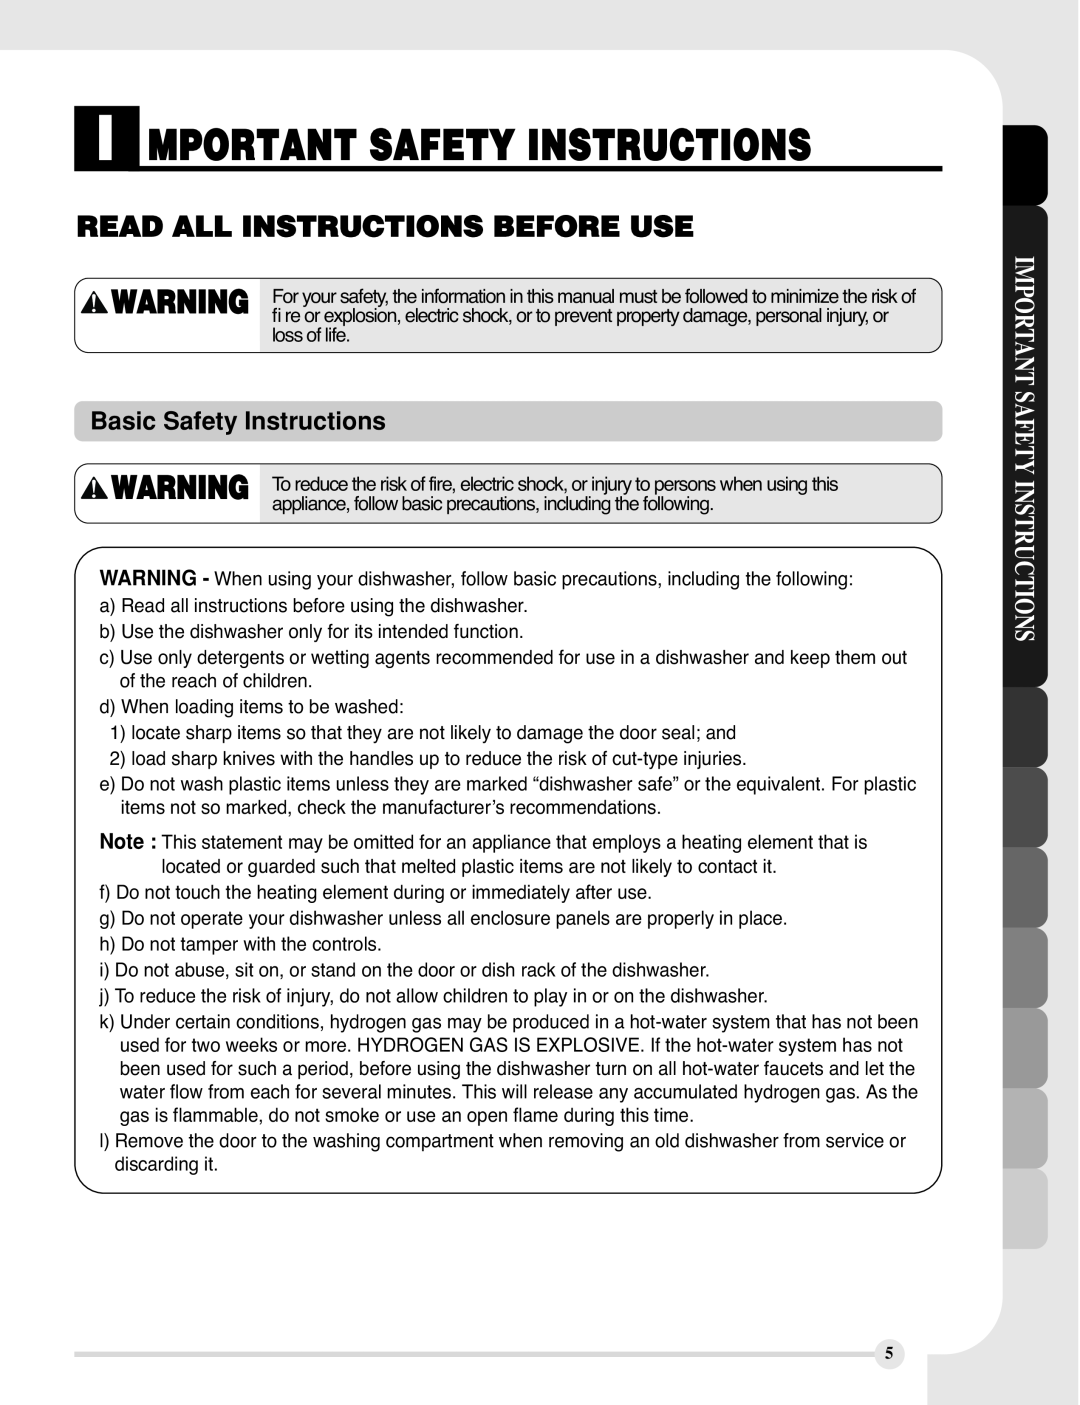 LG Electronics LDF9810BB manual Basic Safety Instructions, I Mportant Safety Instructions, Read All Instructions Before Use 